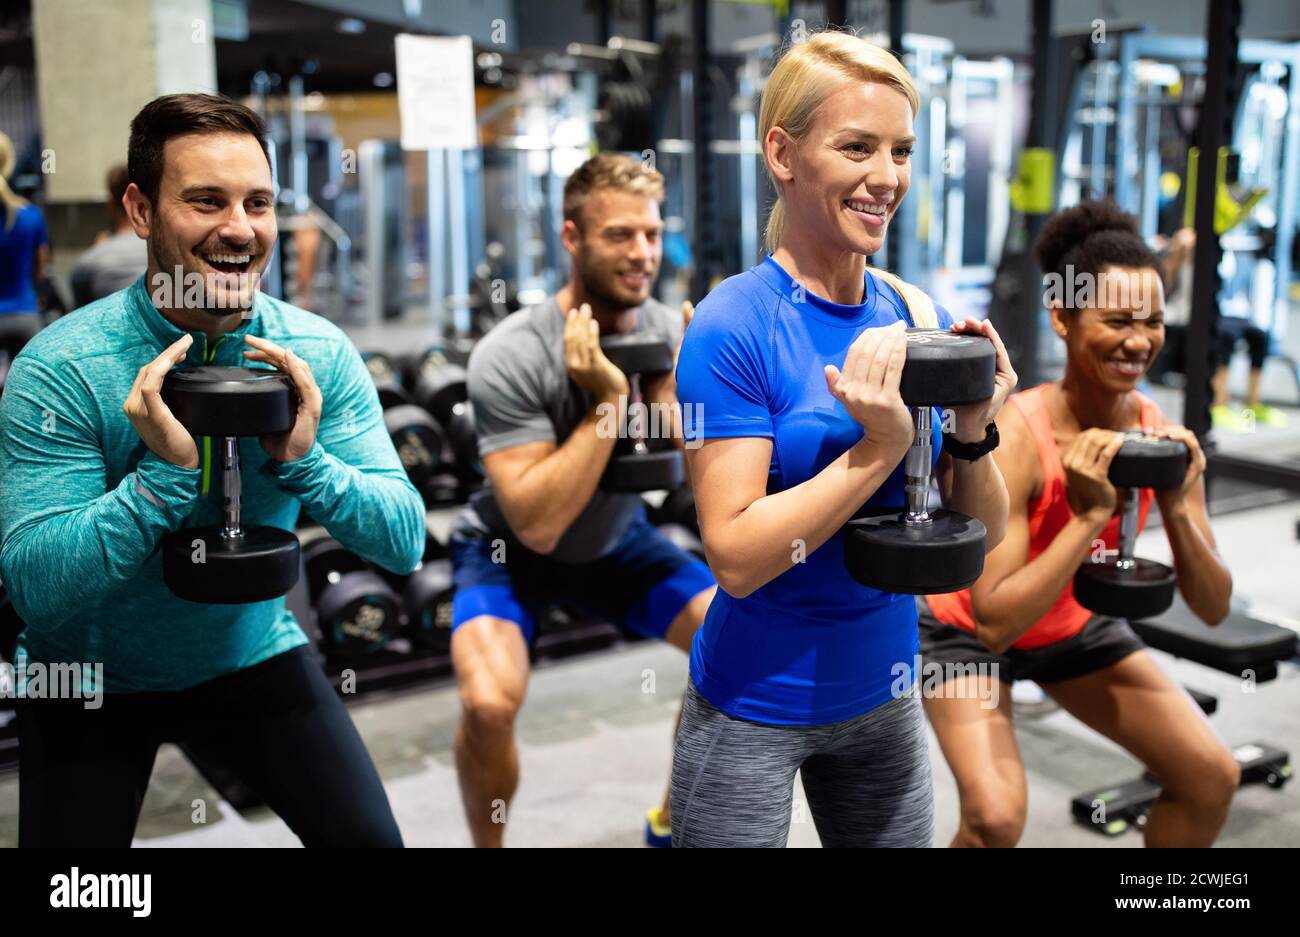 Group of fit people in gym training. Multiracial group of friends working out together Stock Photo